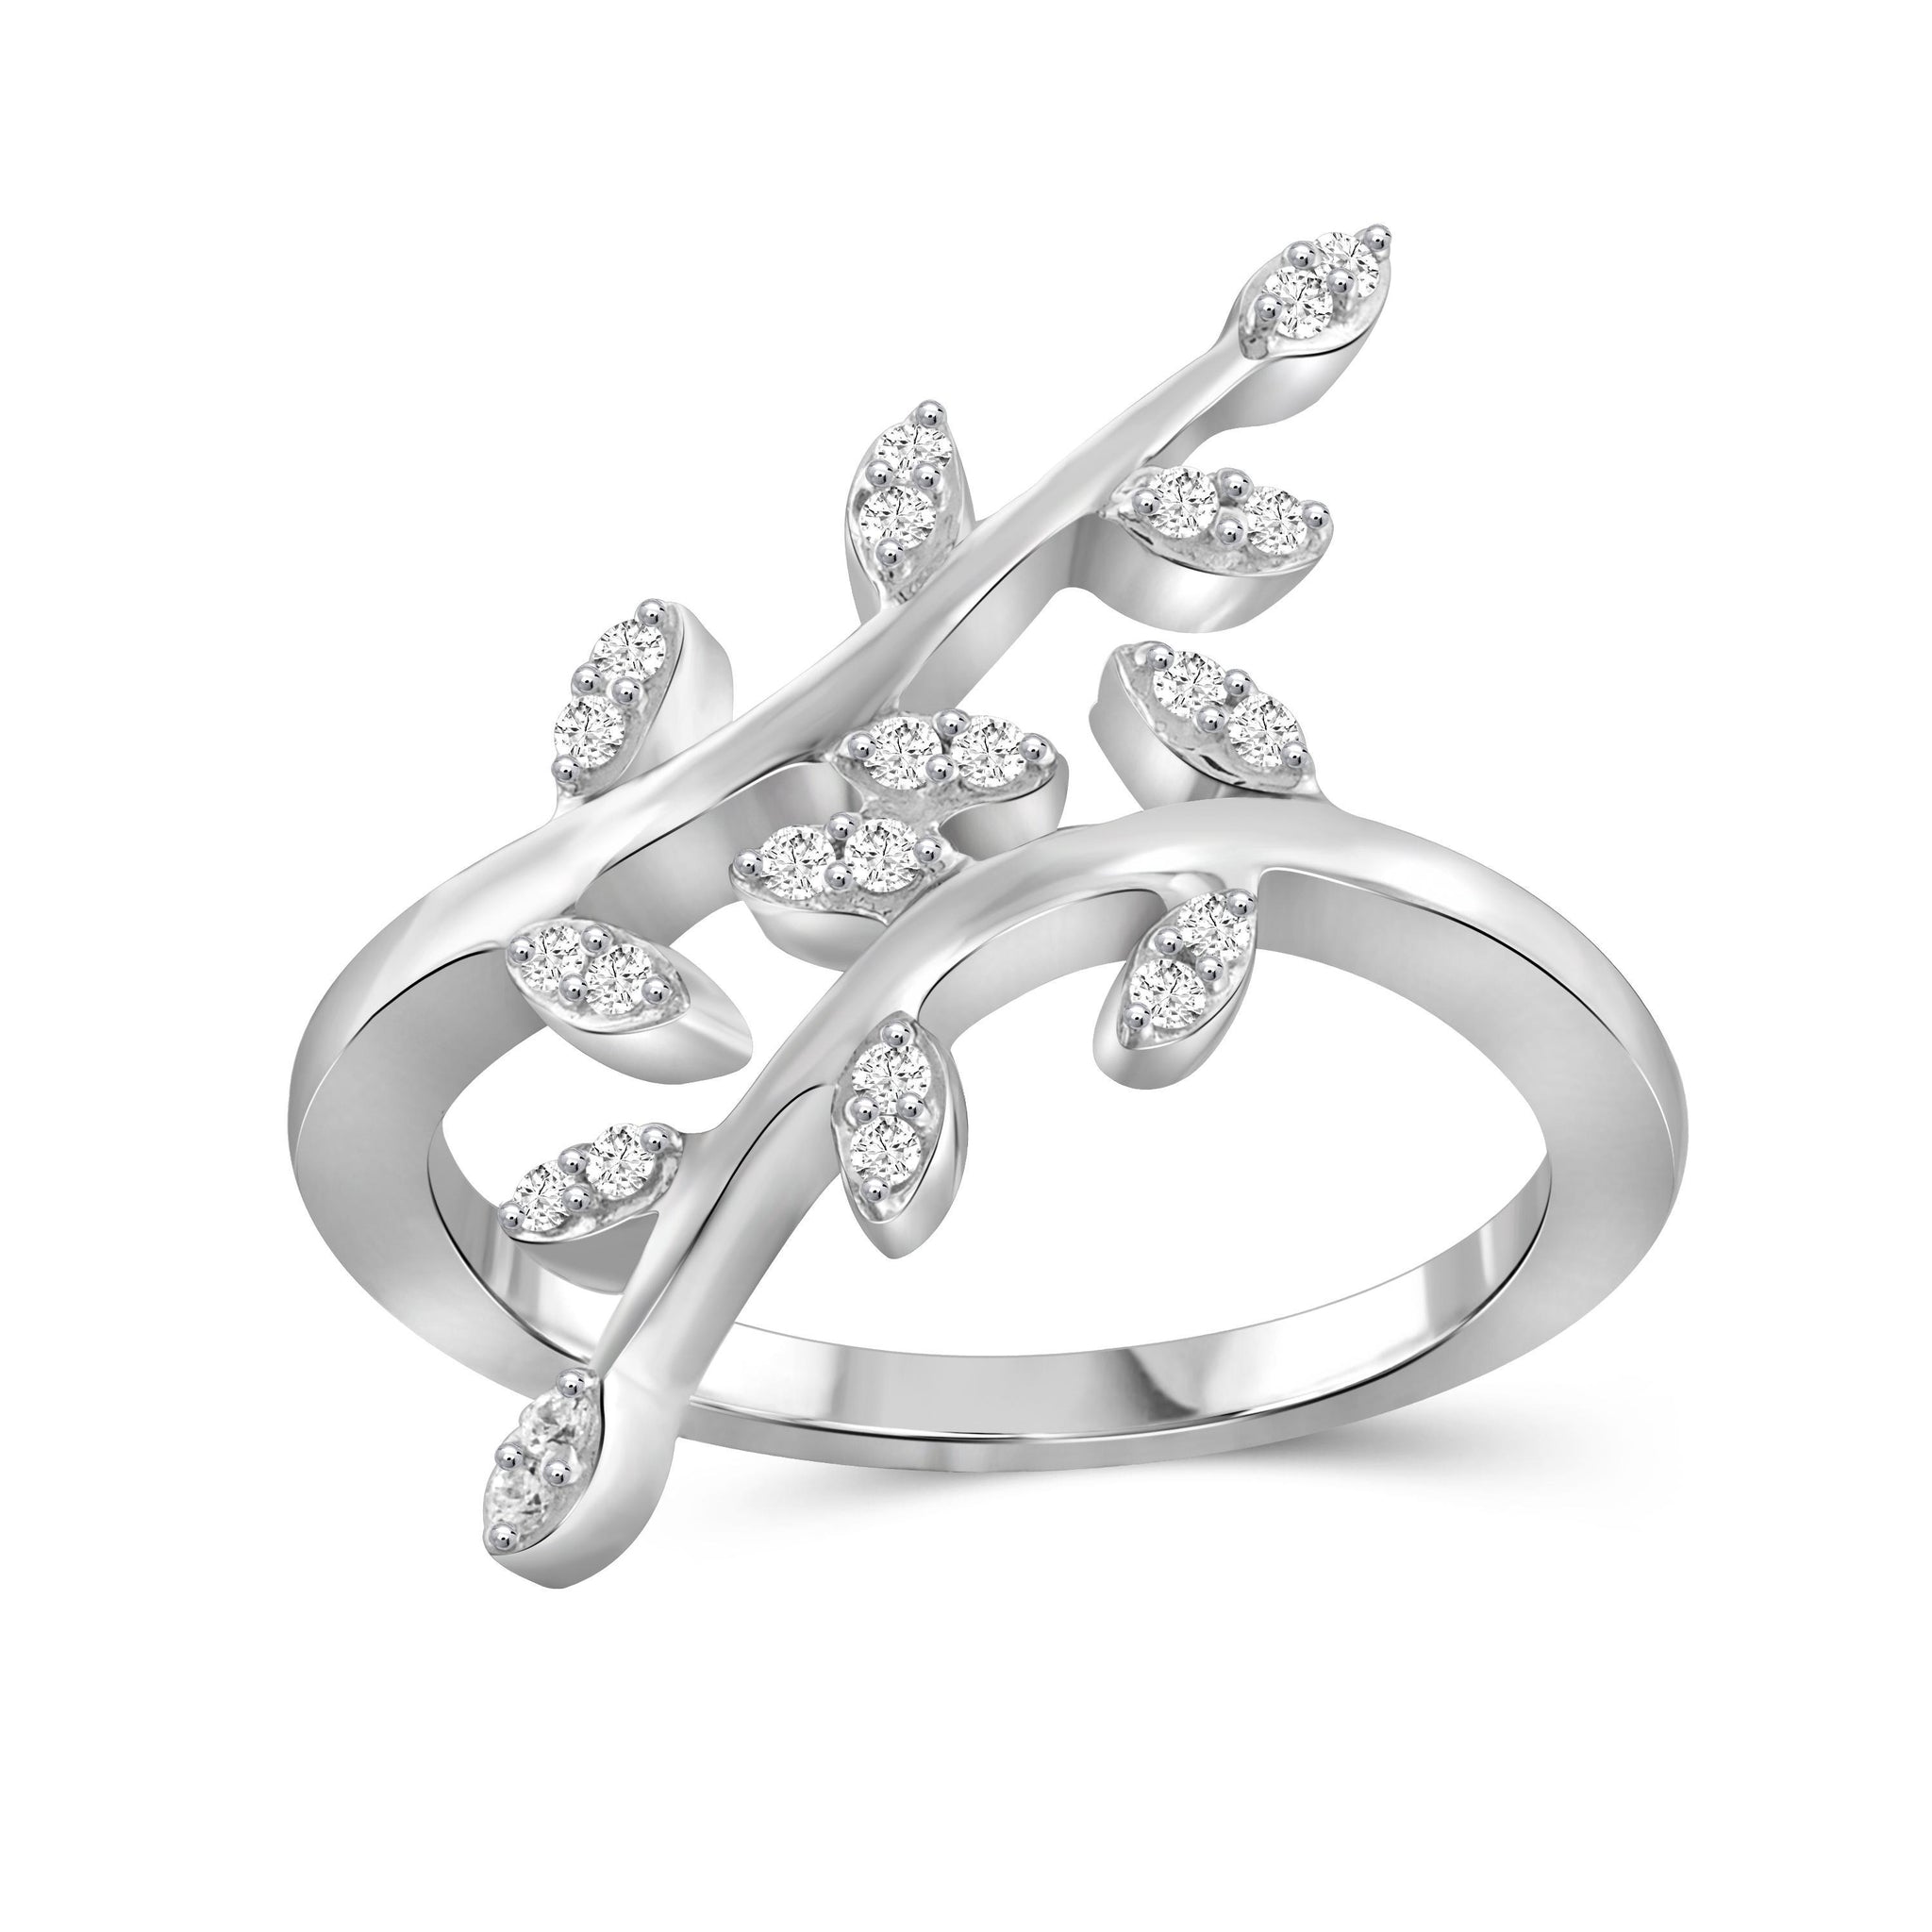 JewelonFire 1/4 Carat T.W. White Diamond Sterling Silver Leaf Ring - Assorted Colors